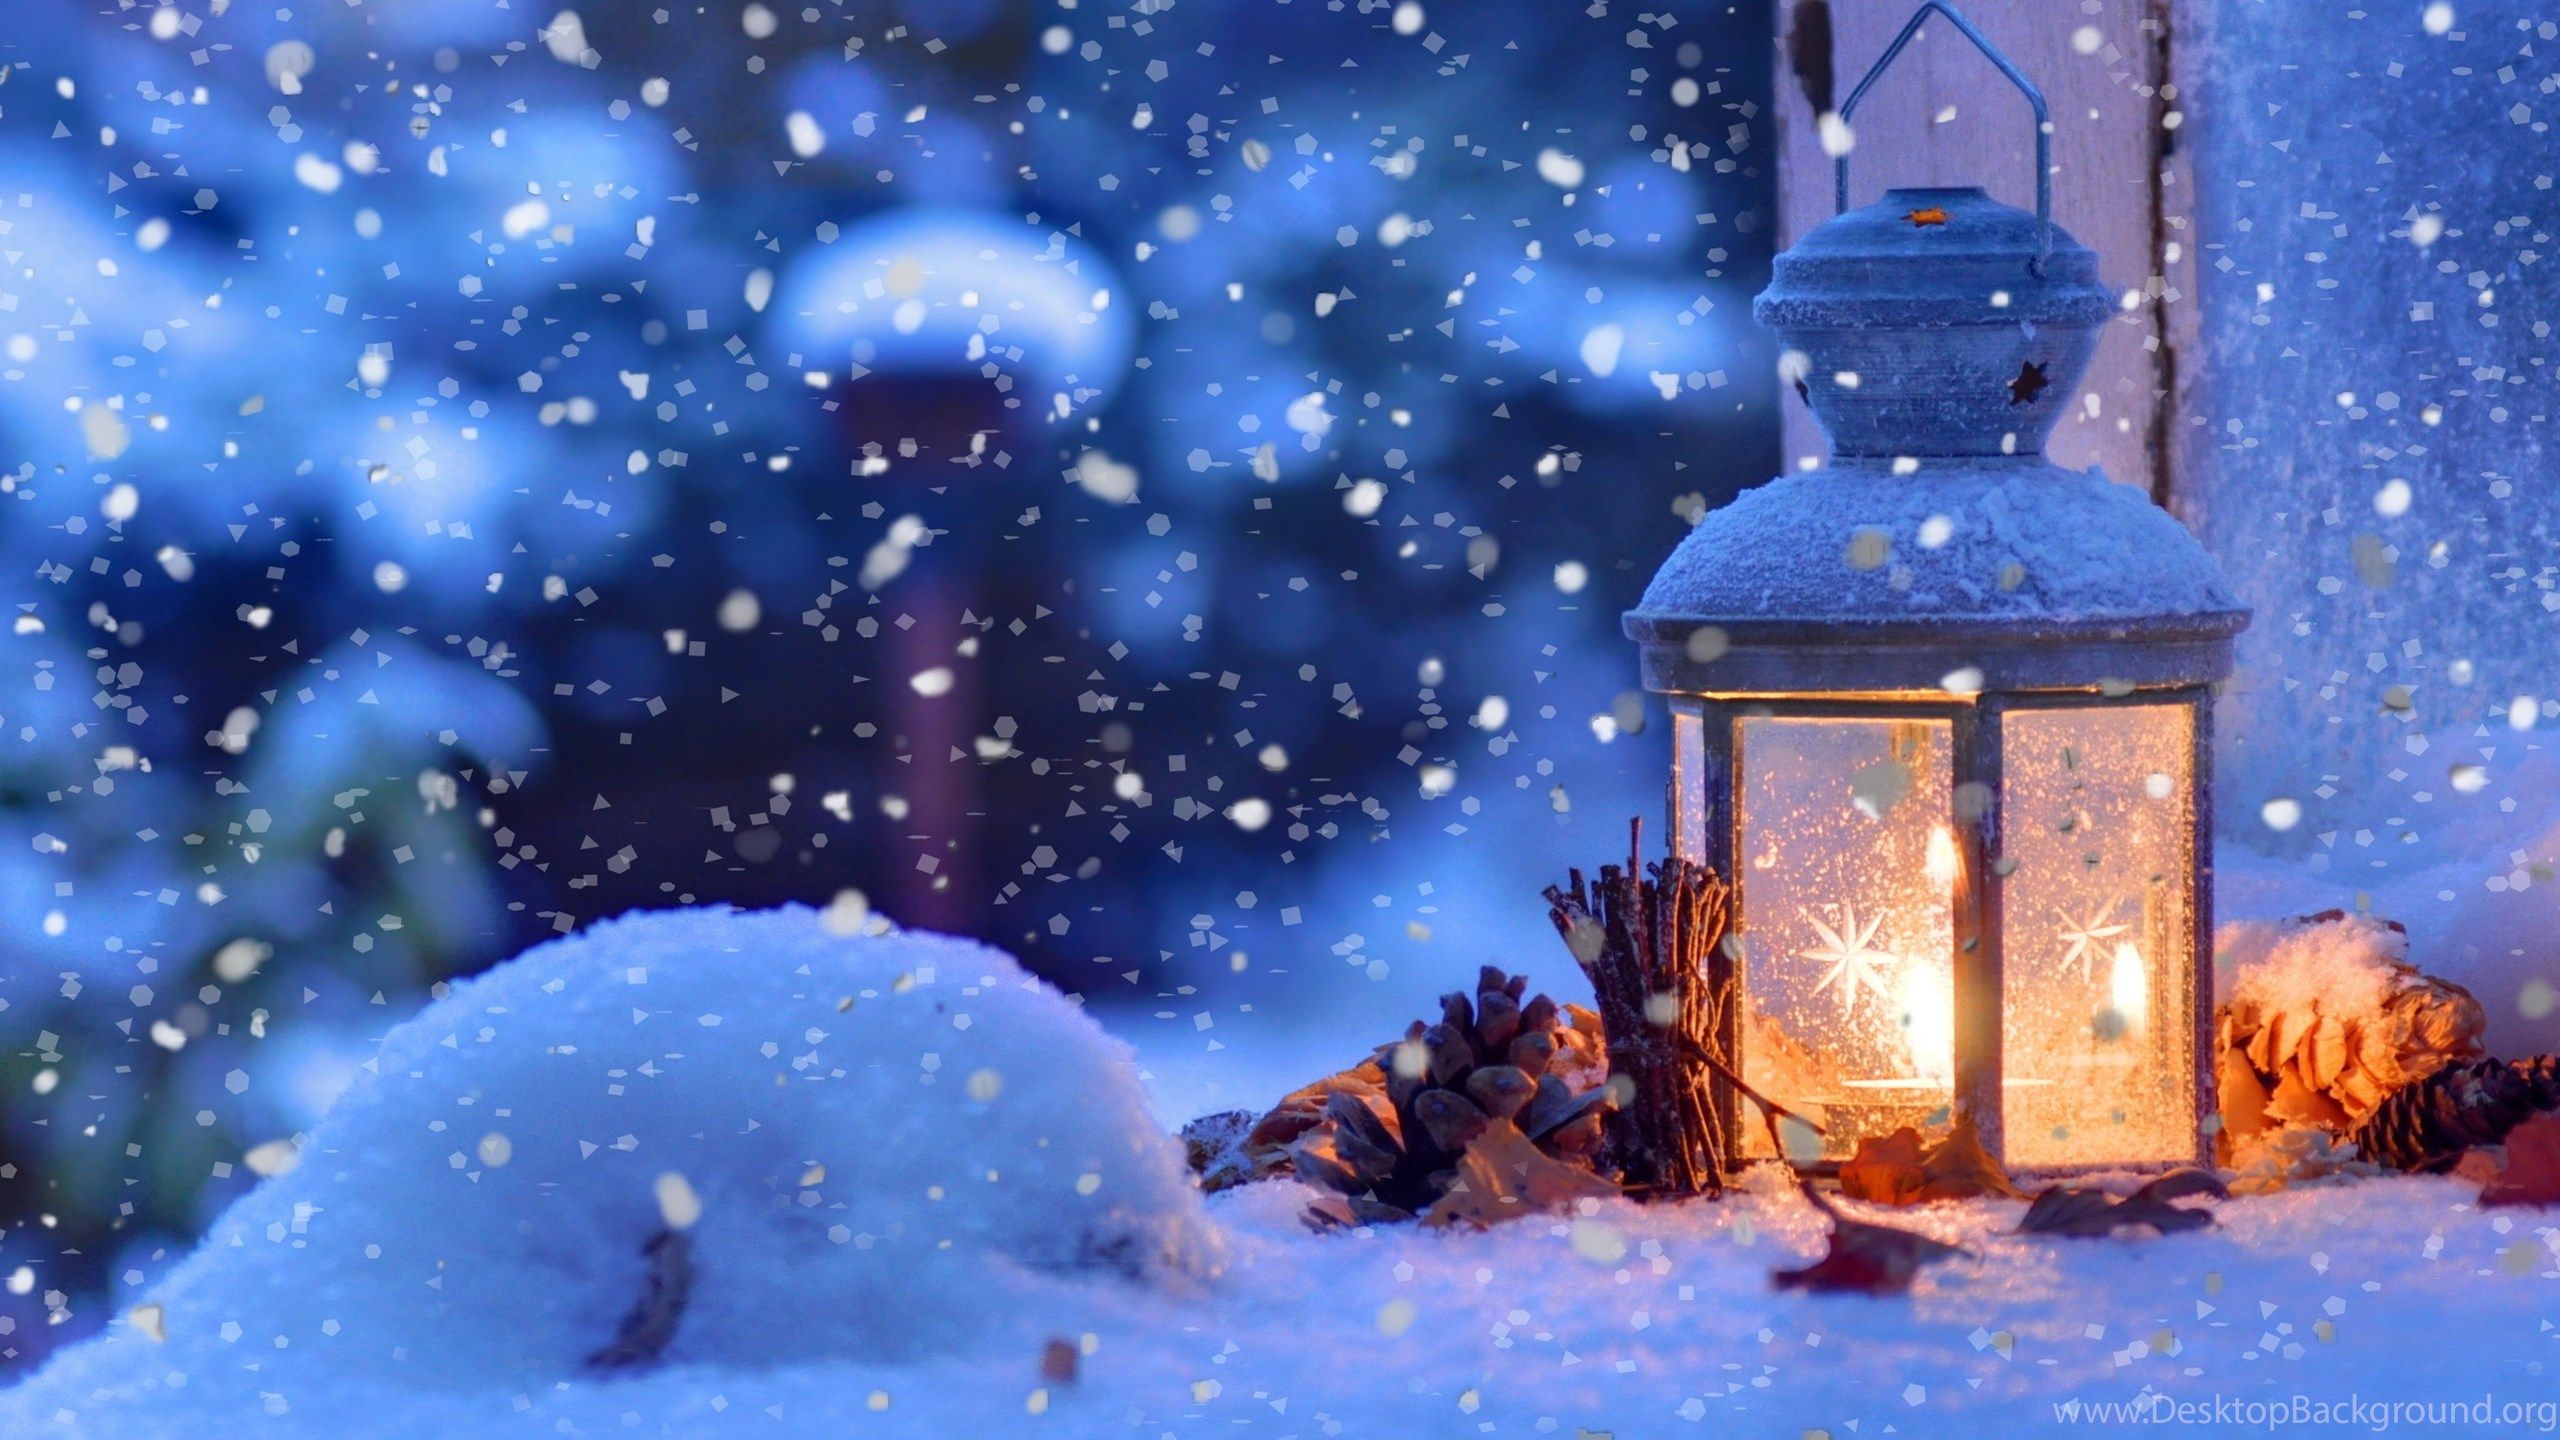 Warm Candle In A Cold Winter Night HD Wallpaper Desktop Background